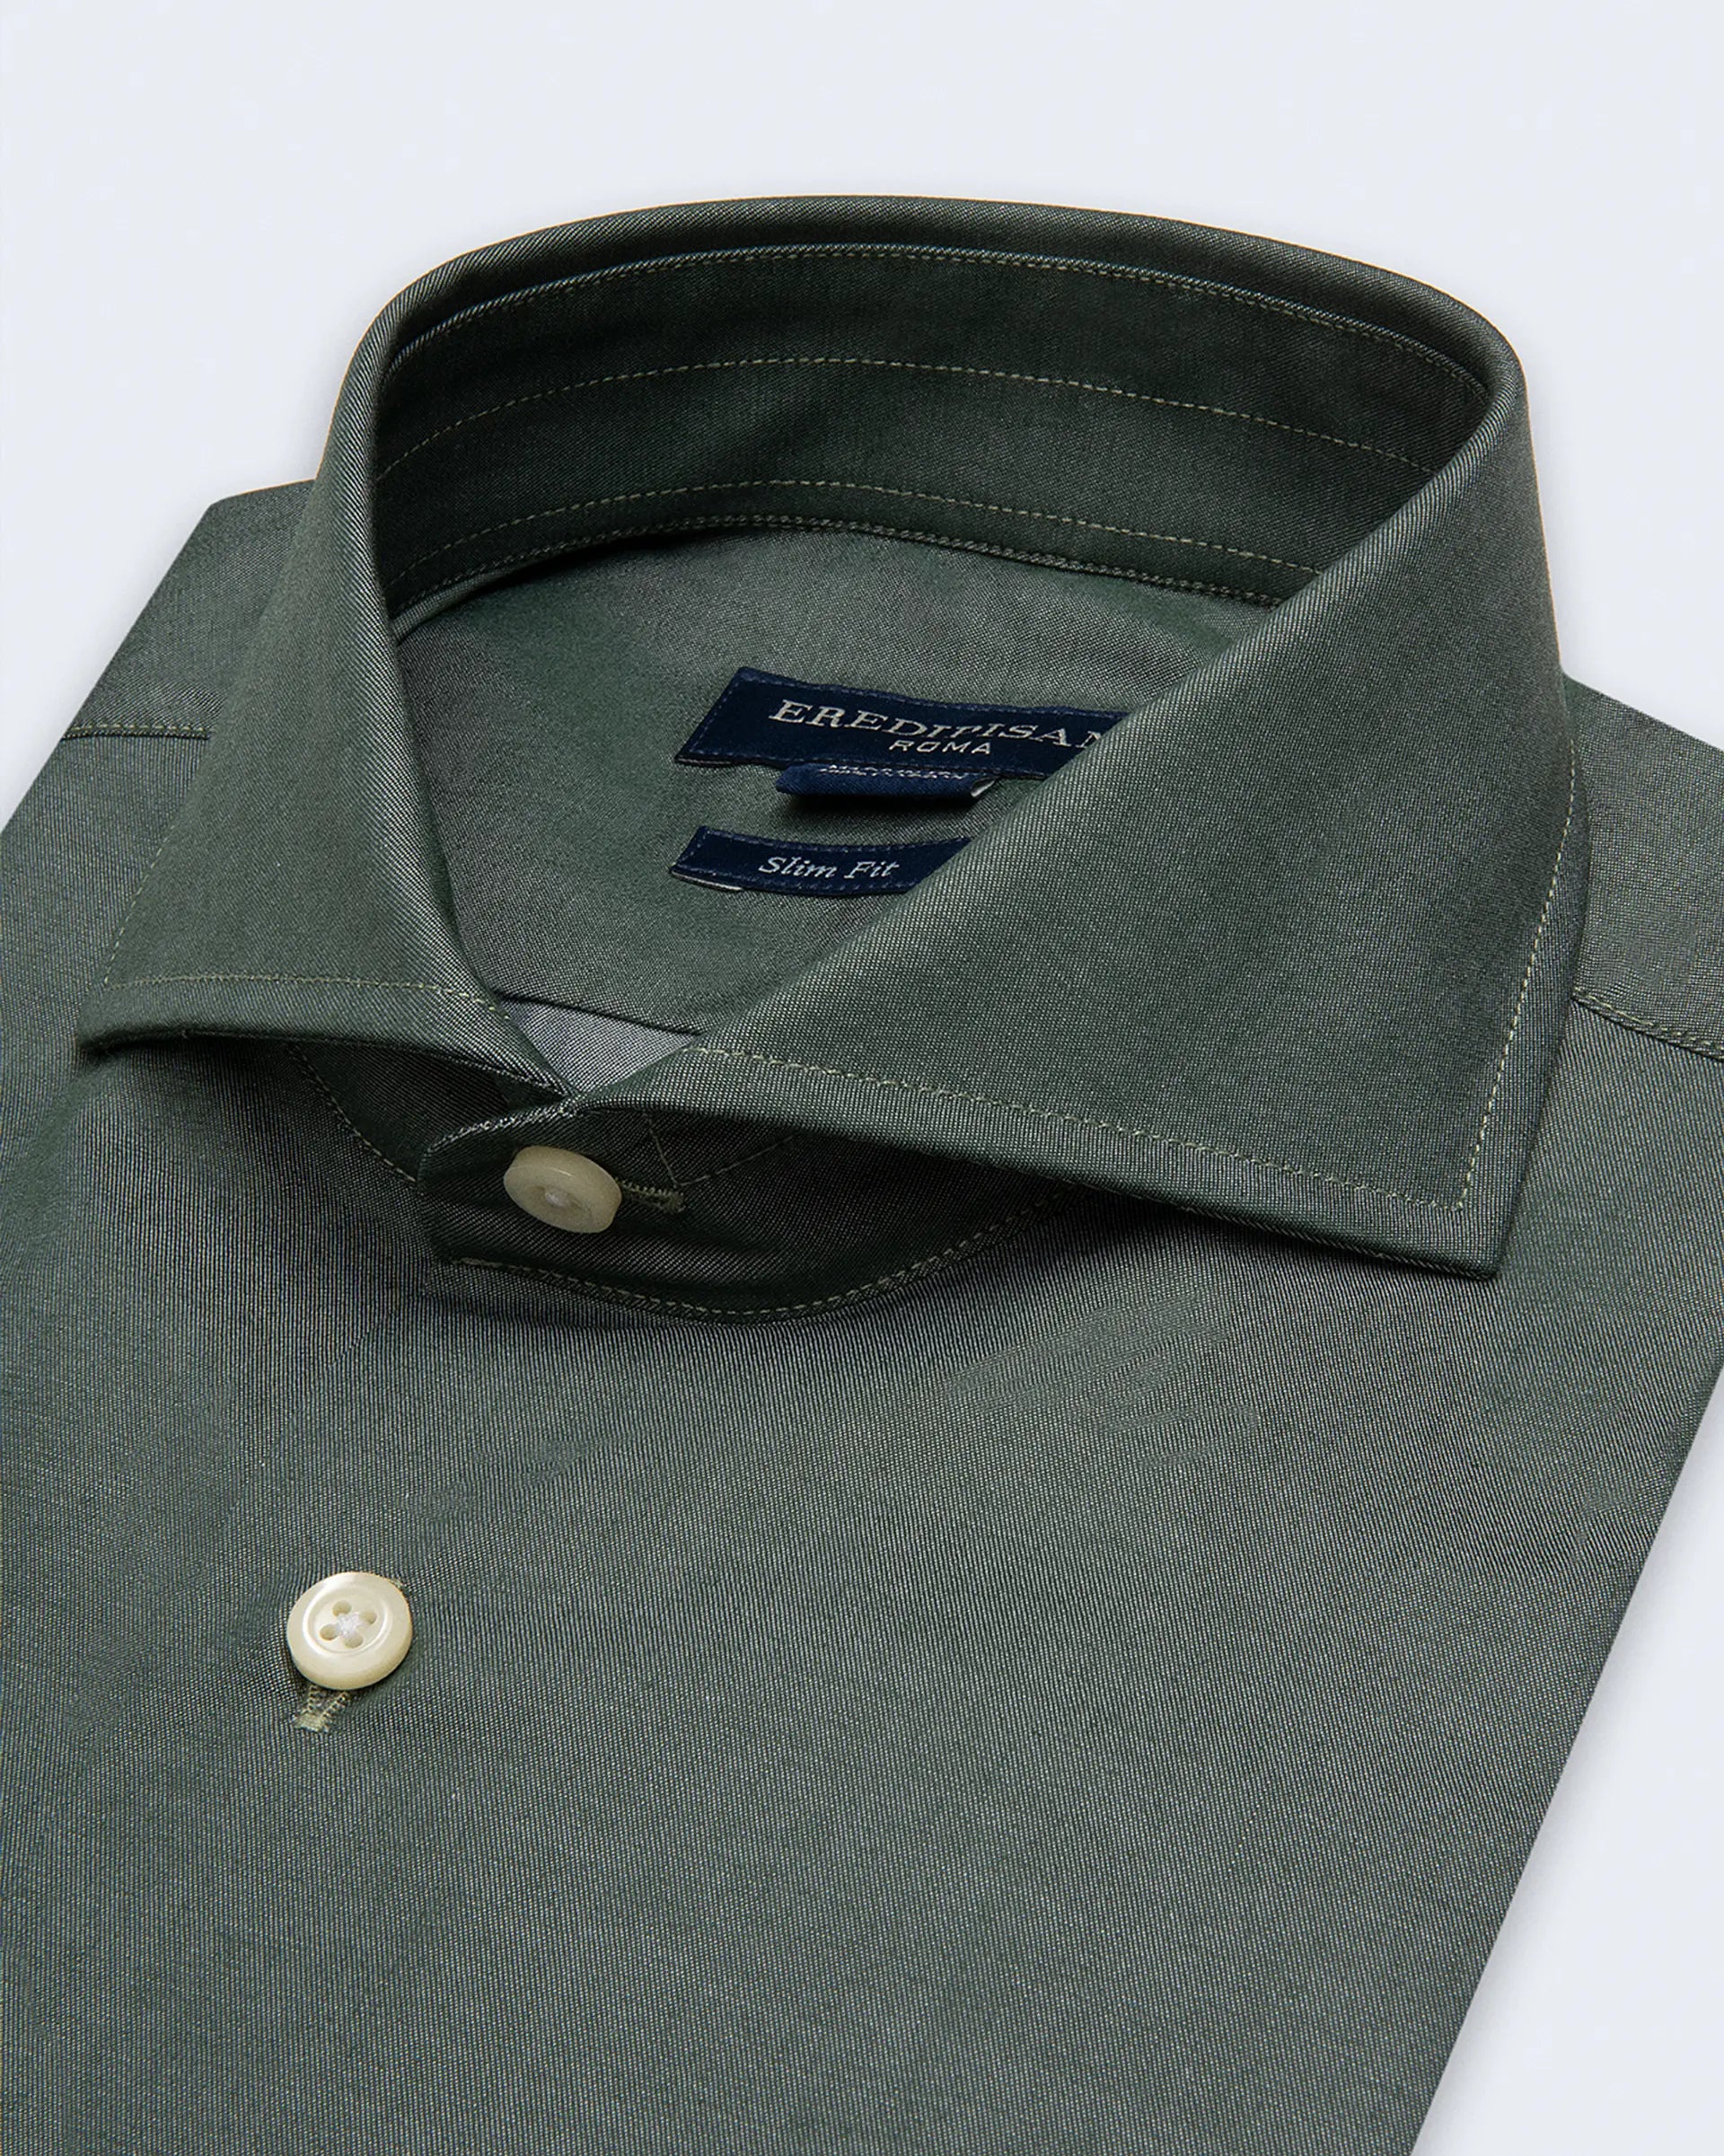 Military green shirt in slim fit cotton twill with Venice collar